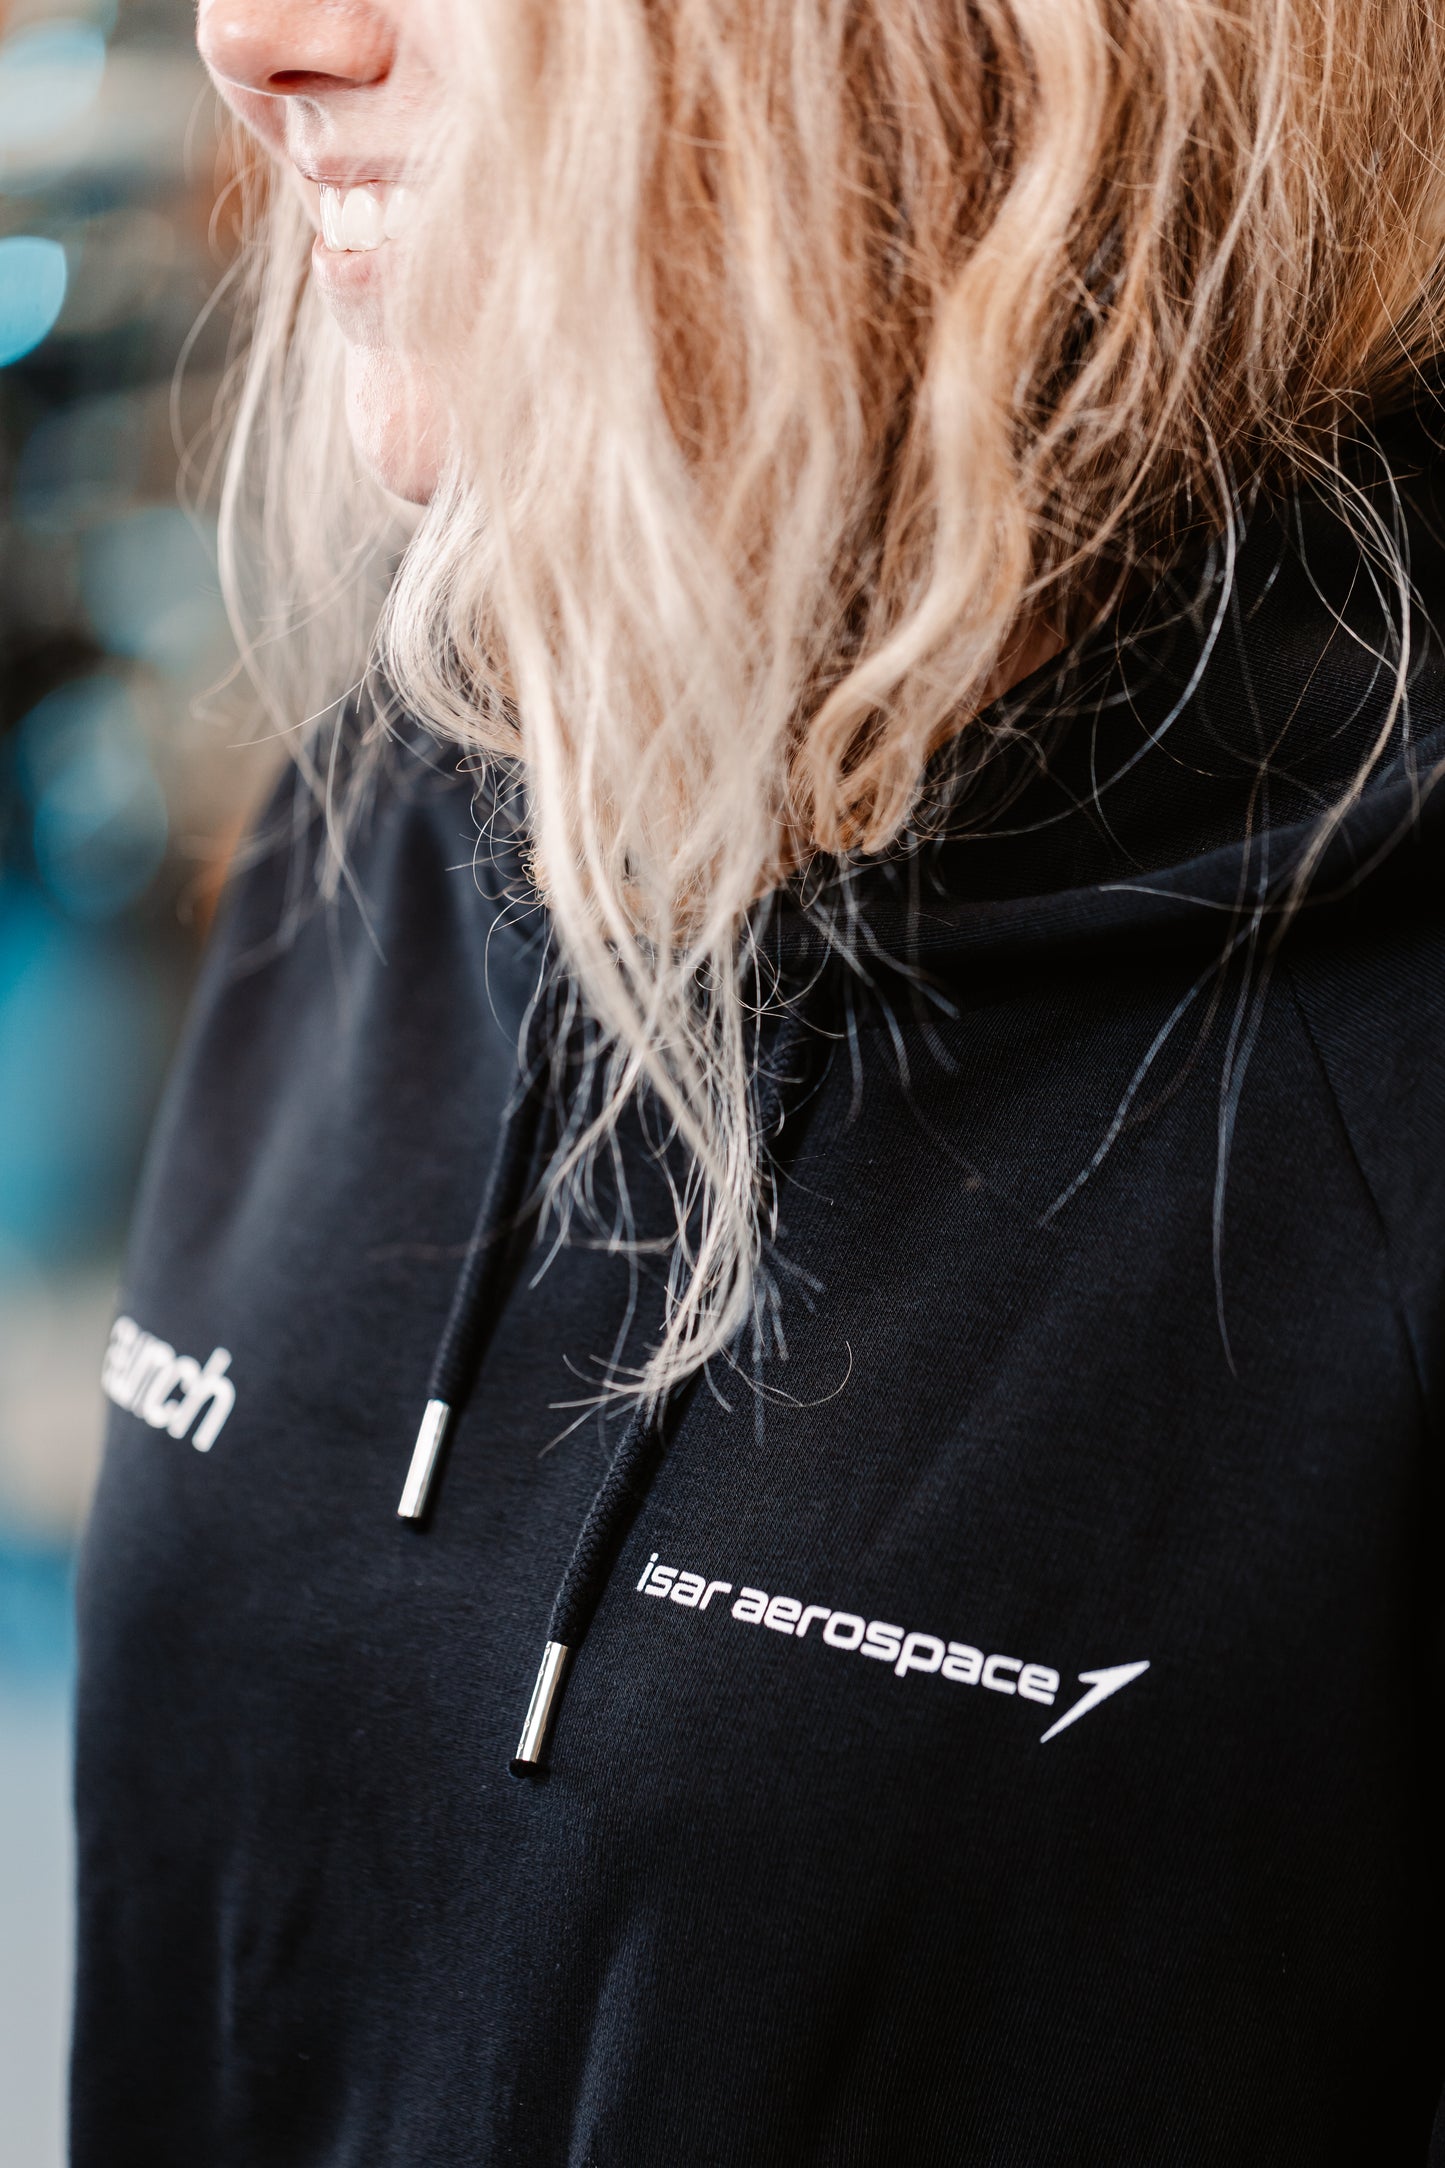 Women Hoodie Launch for Life